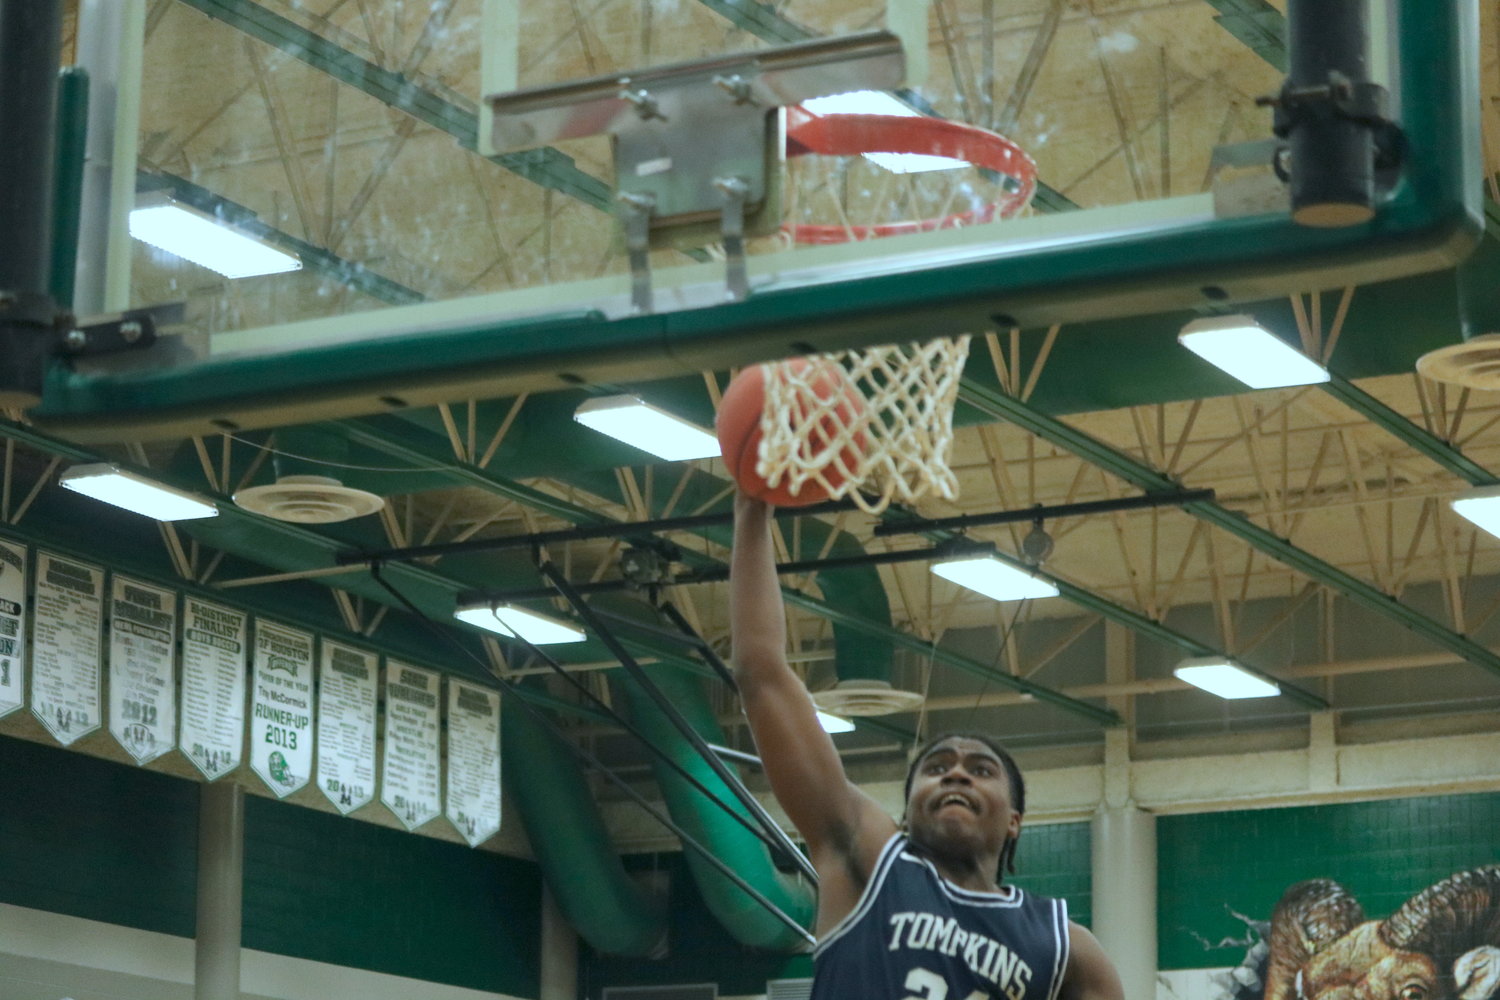 Jason Clark dunks during Wednesday’s game between Mayde Creek and Tompkins at the Mayde Creek gym.